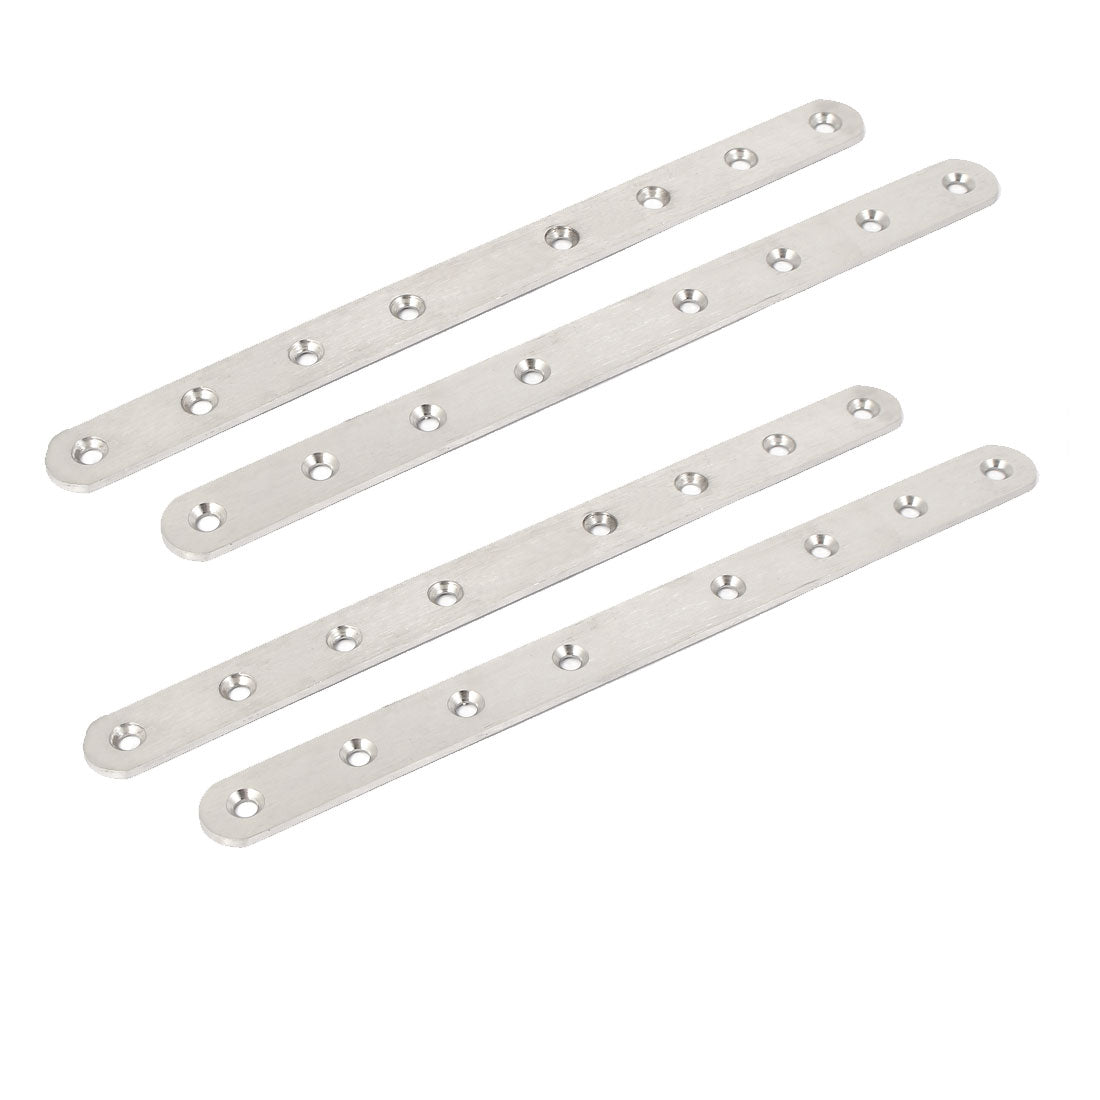 uxcell Uxcell 250mmx20mmx3mm Straight Flat Mending Repair Plate Joining Fastener 4pcs